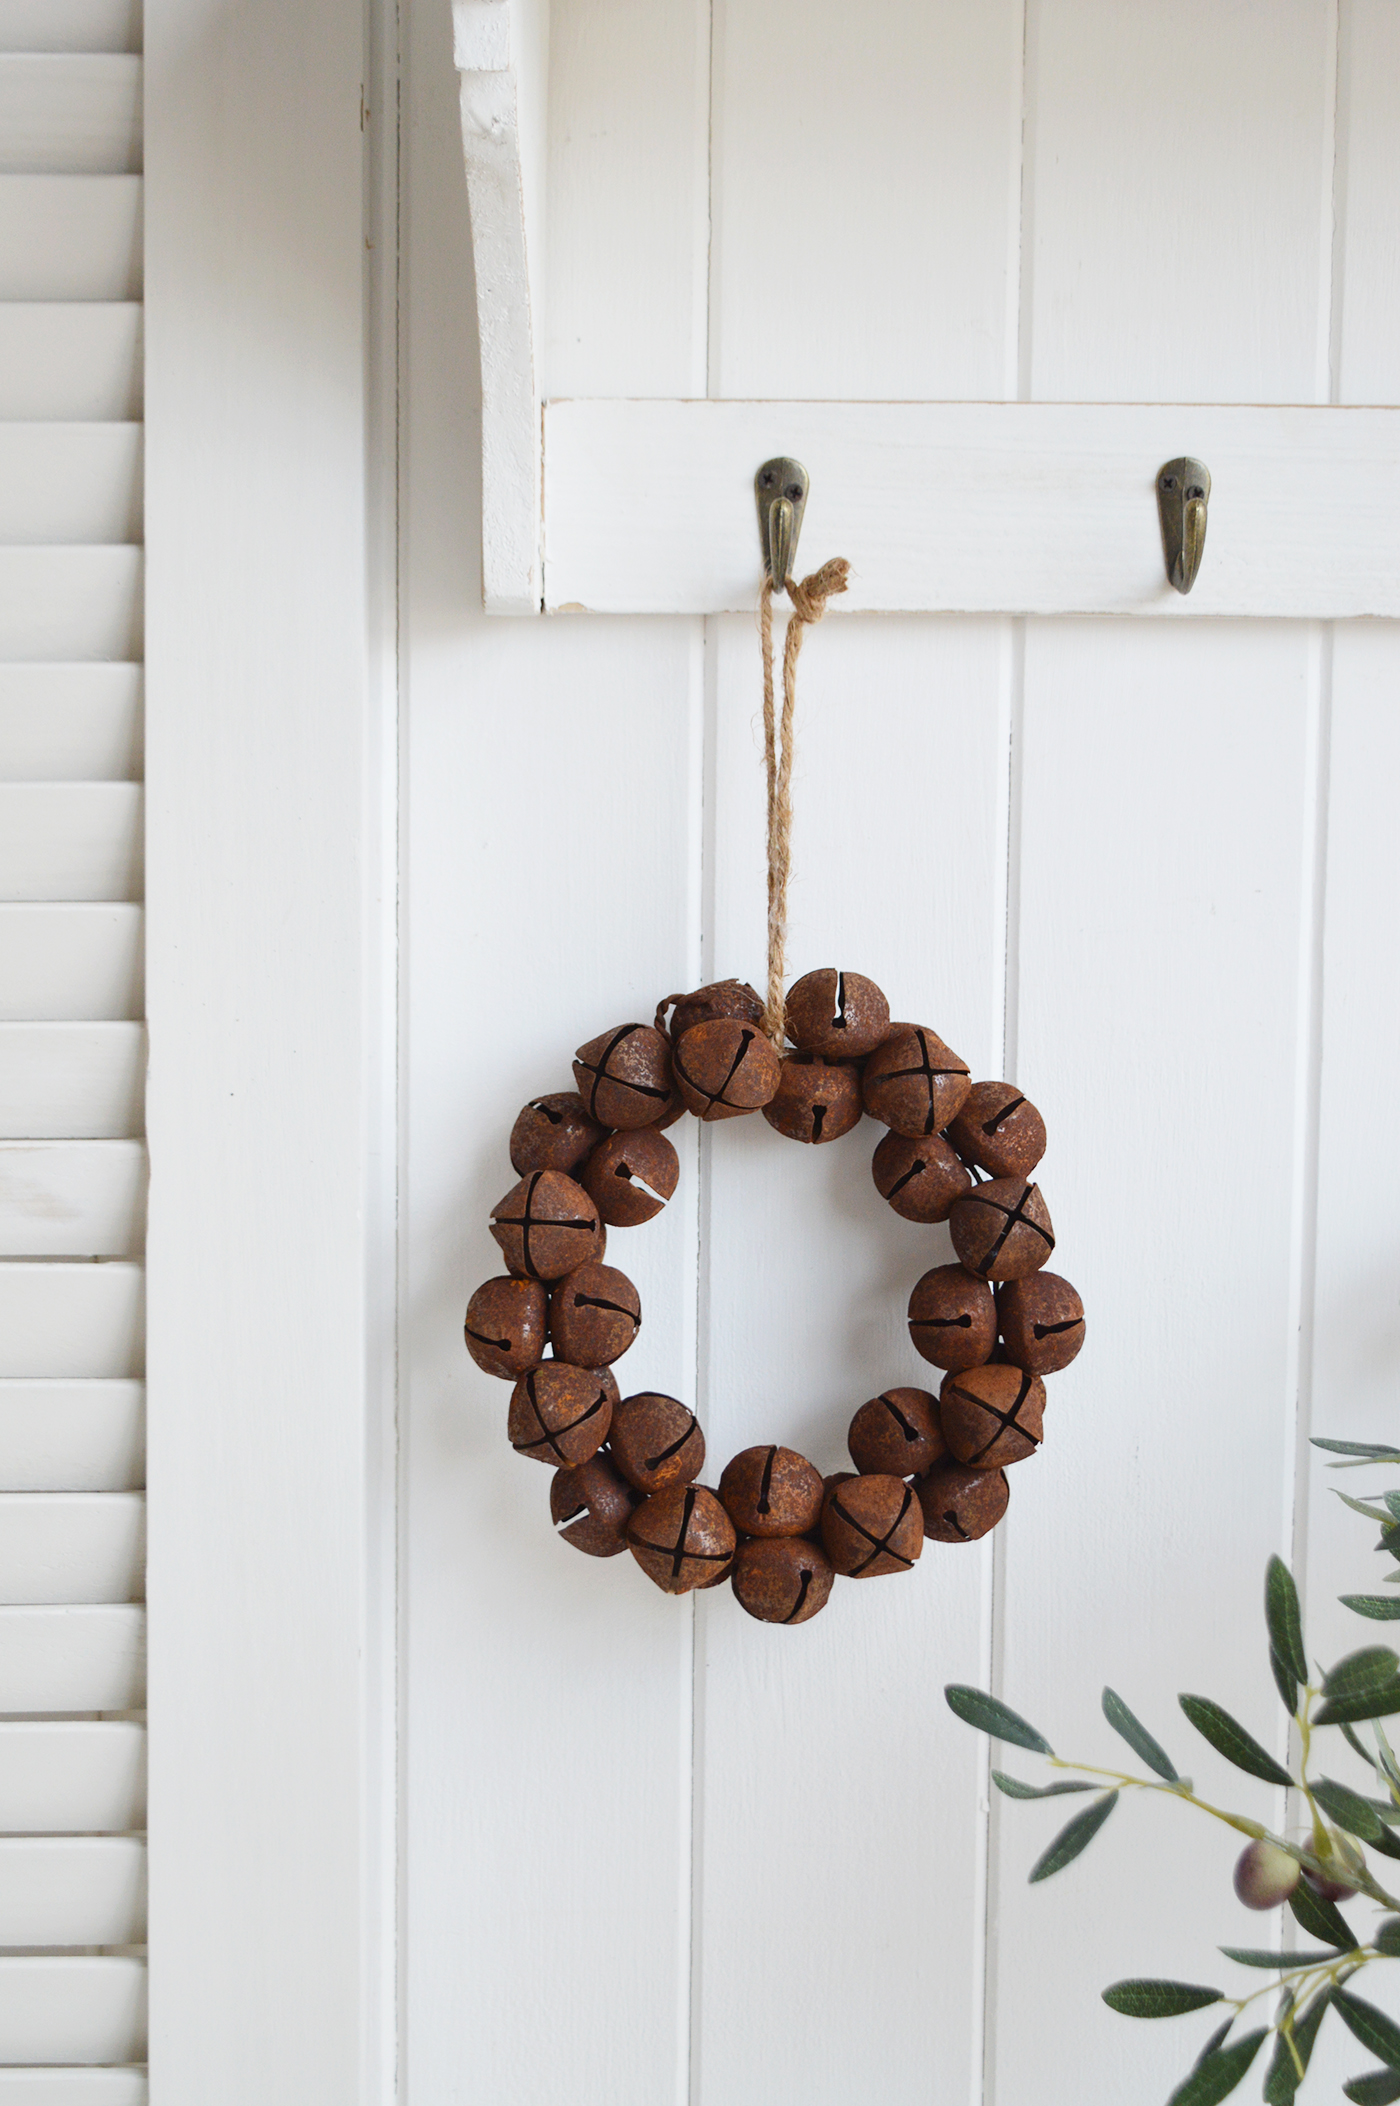 A rusty bell hanging wreath.This is an absolutely beautiful decoration in such a timeless style that will last for many years to comeHang on a peg or door handle for traditional New England farm house decor